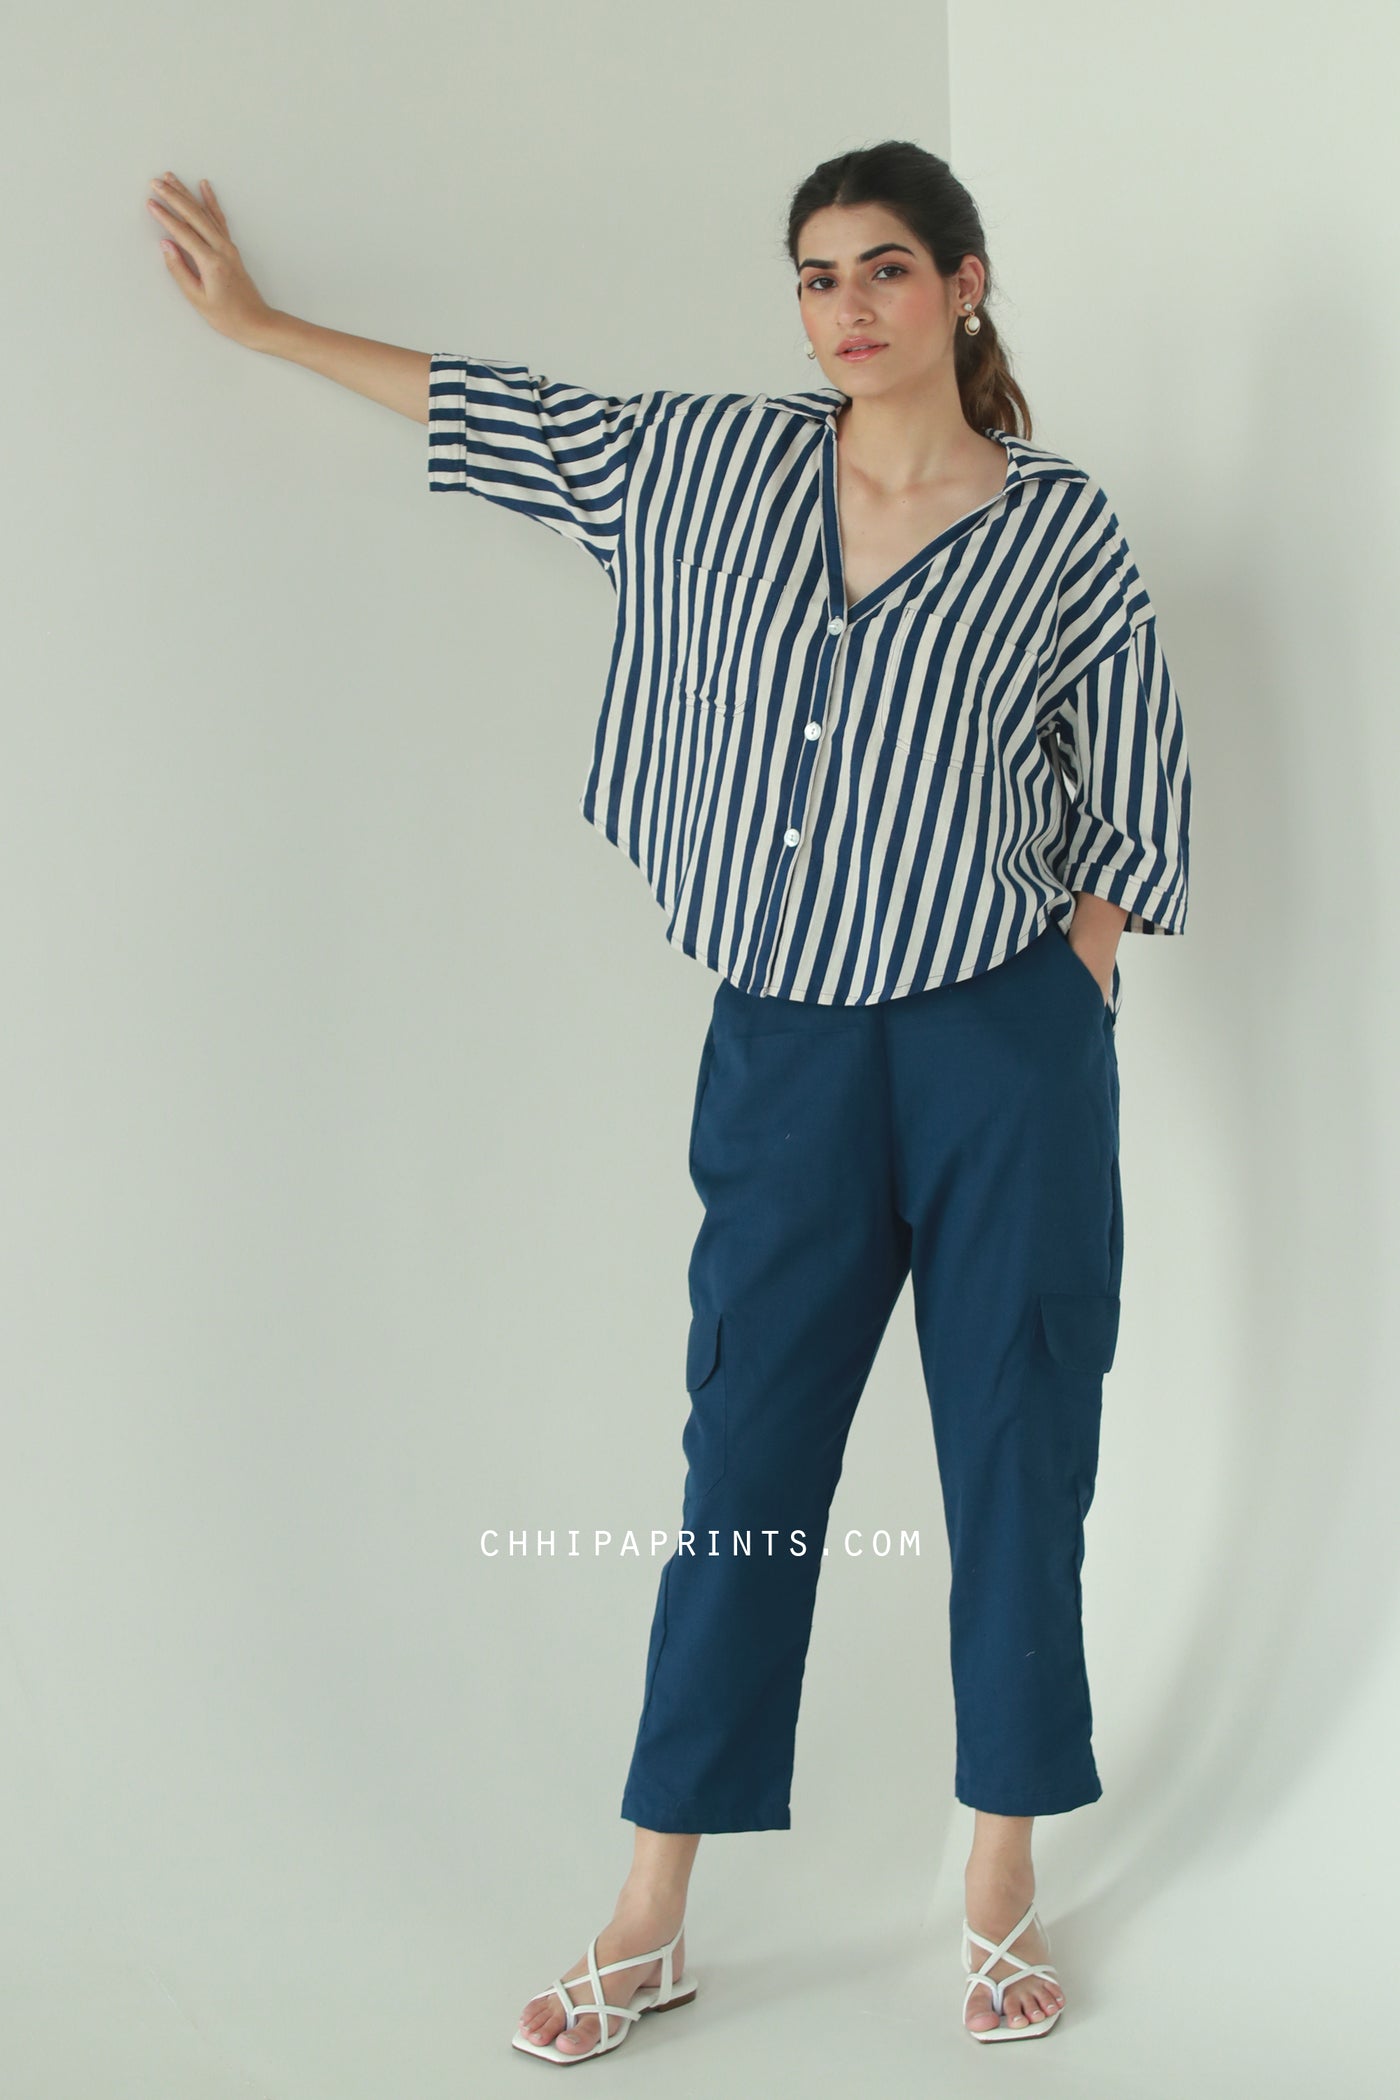 Cotton Stripes Print Relax Fit Shirt in Navy Blue